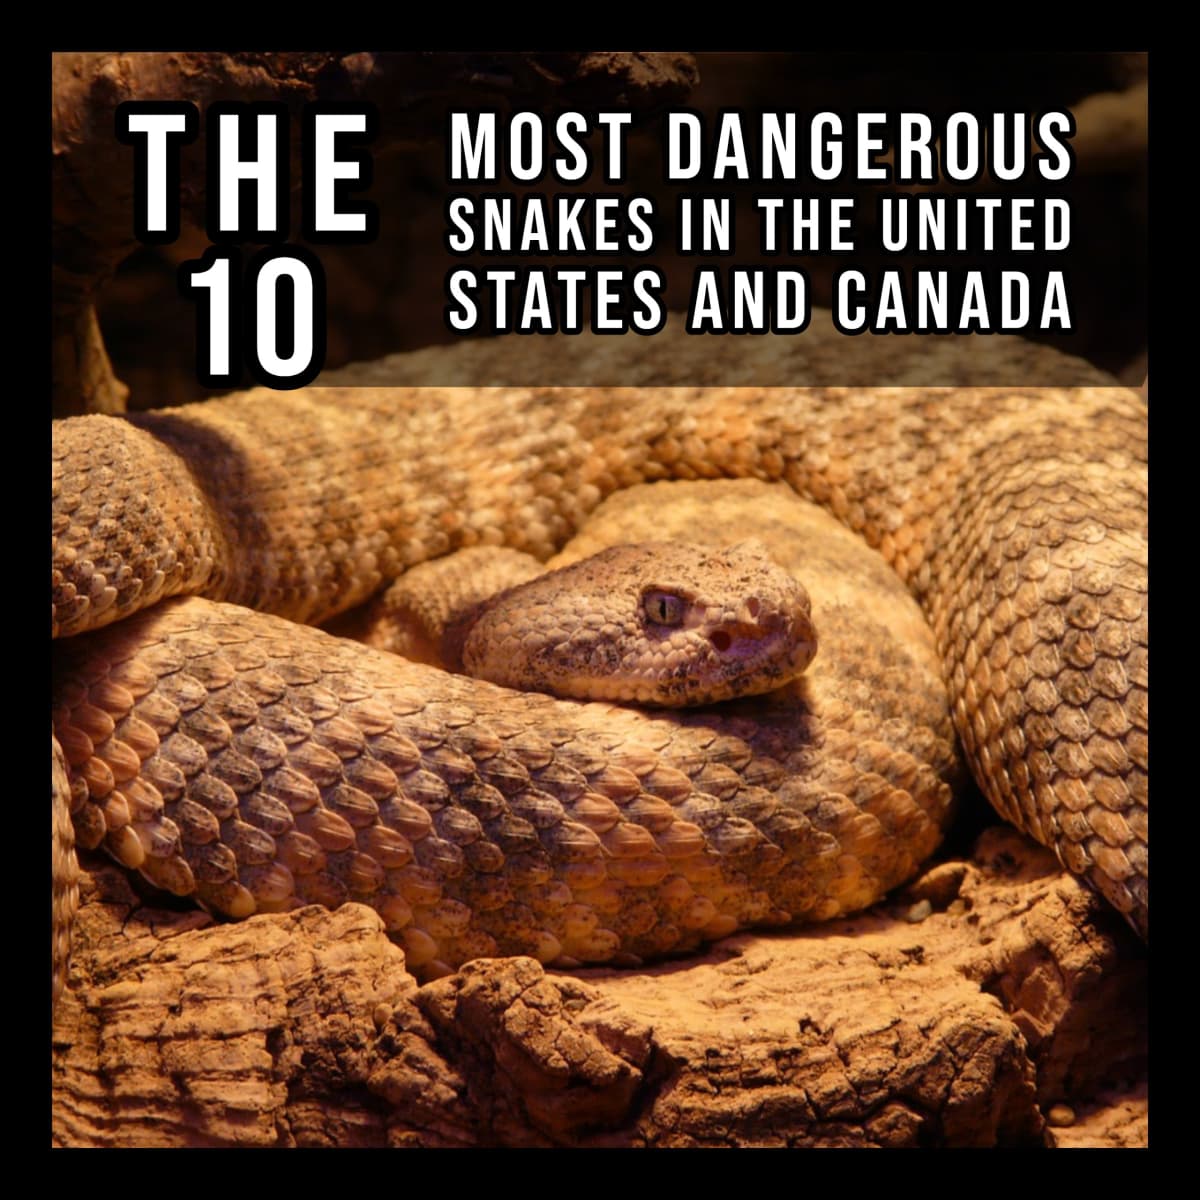 The Top 10 Deadliest Snakes in the United States - Owlcation